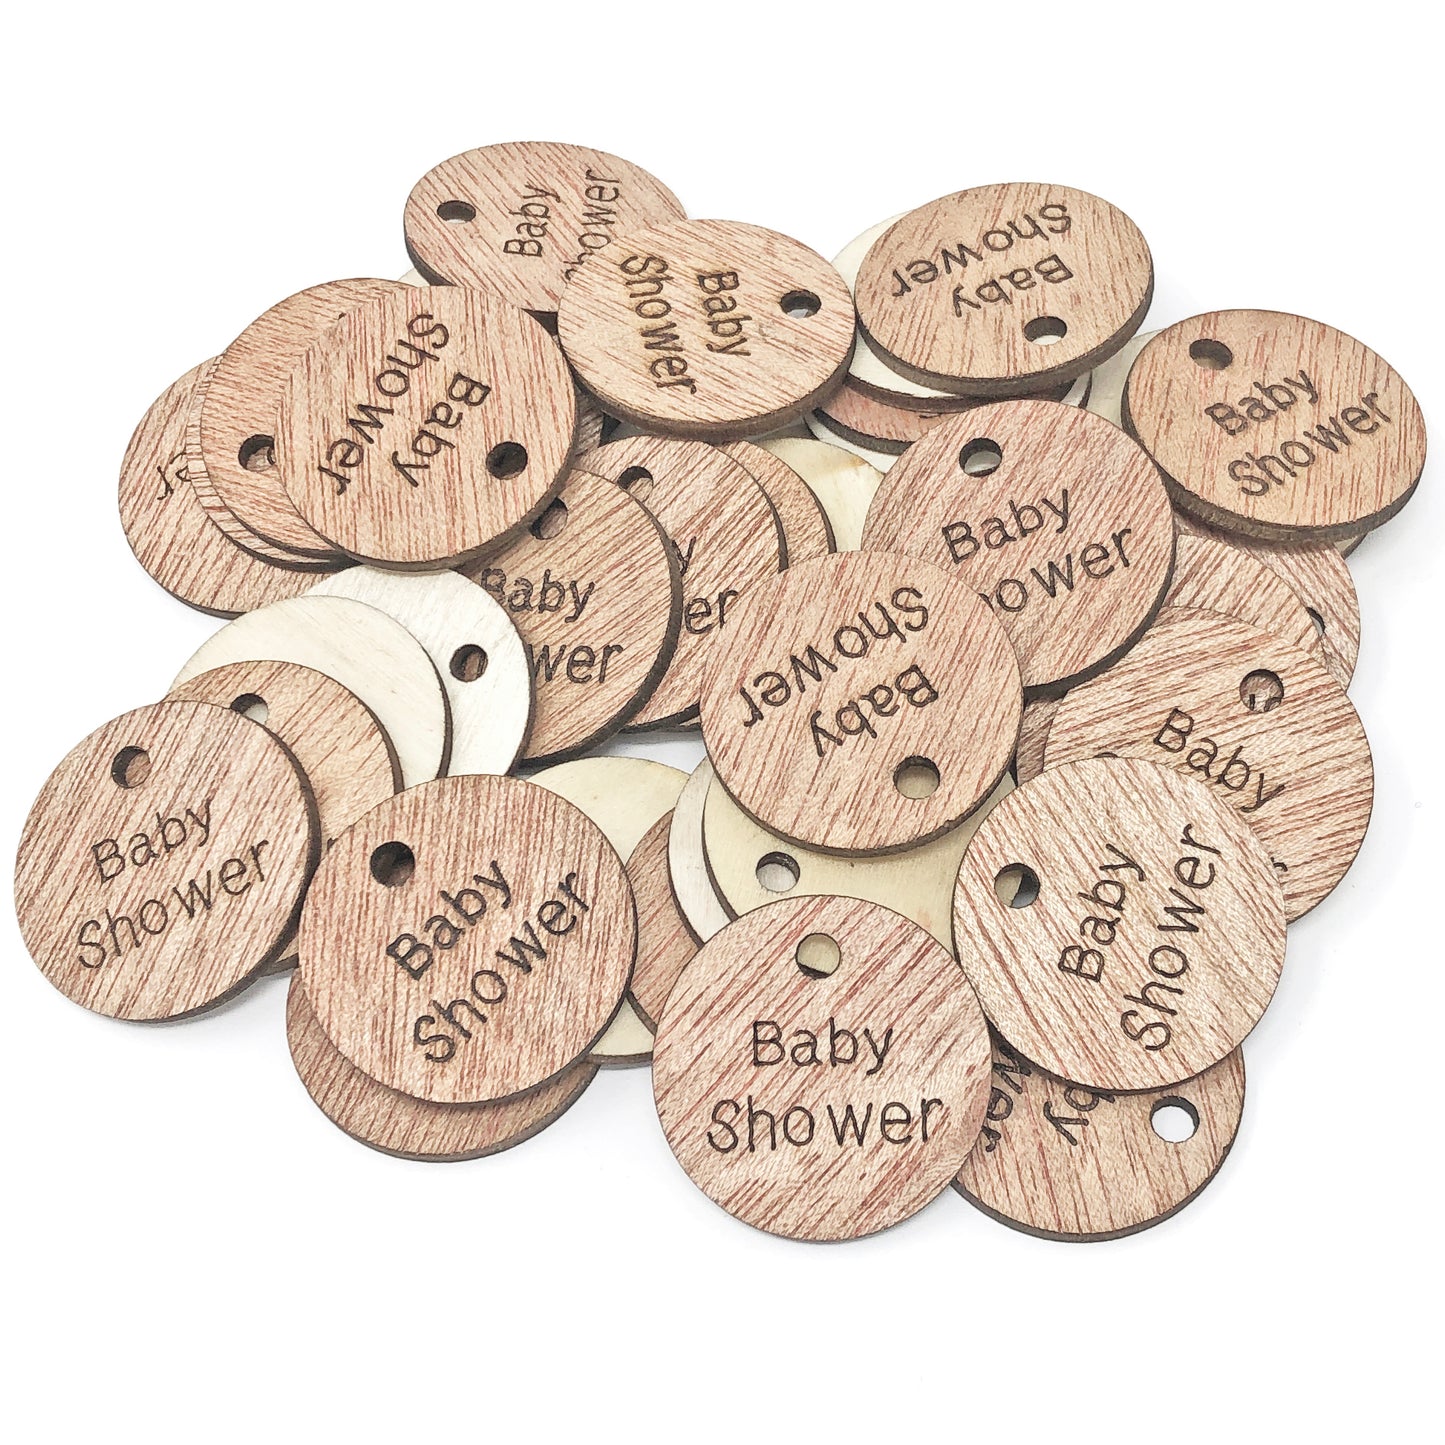 25mm Wooden Craft Round Tags